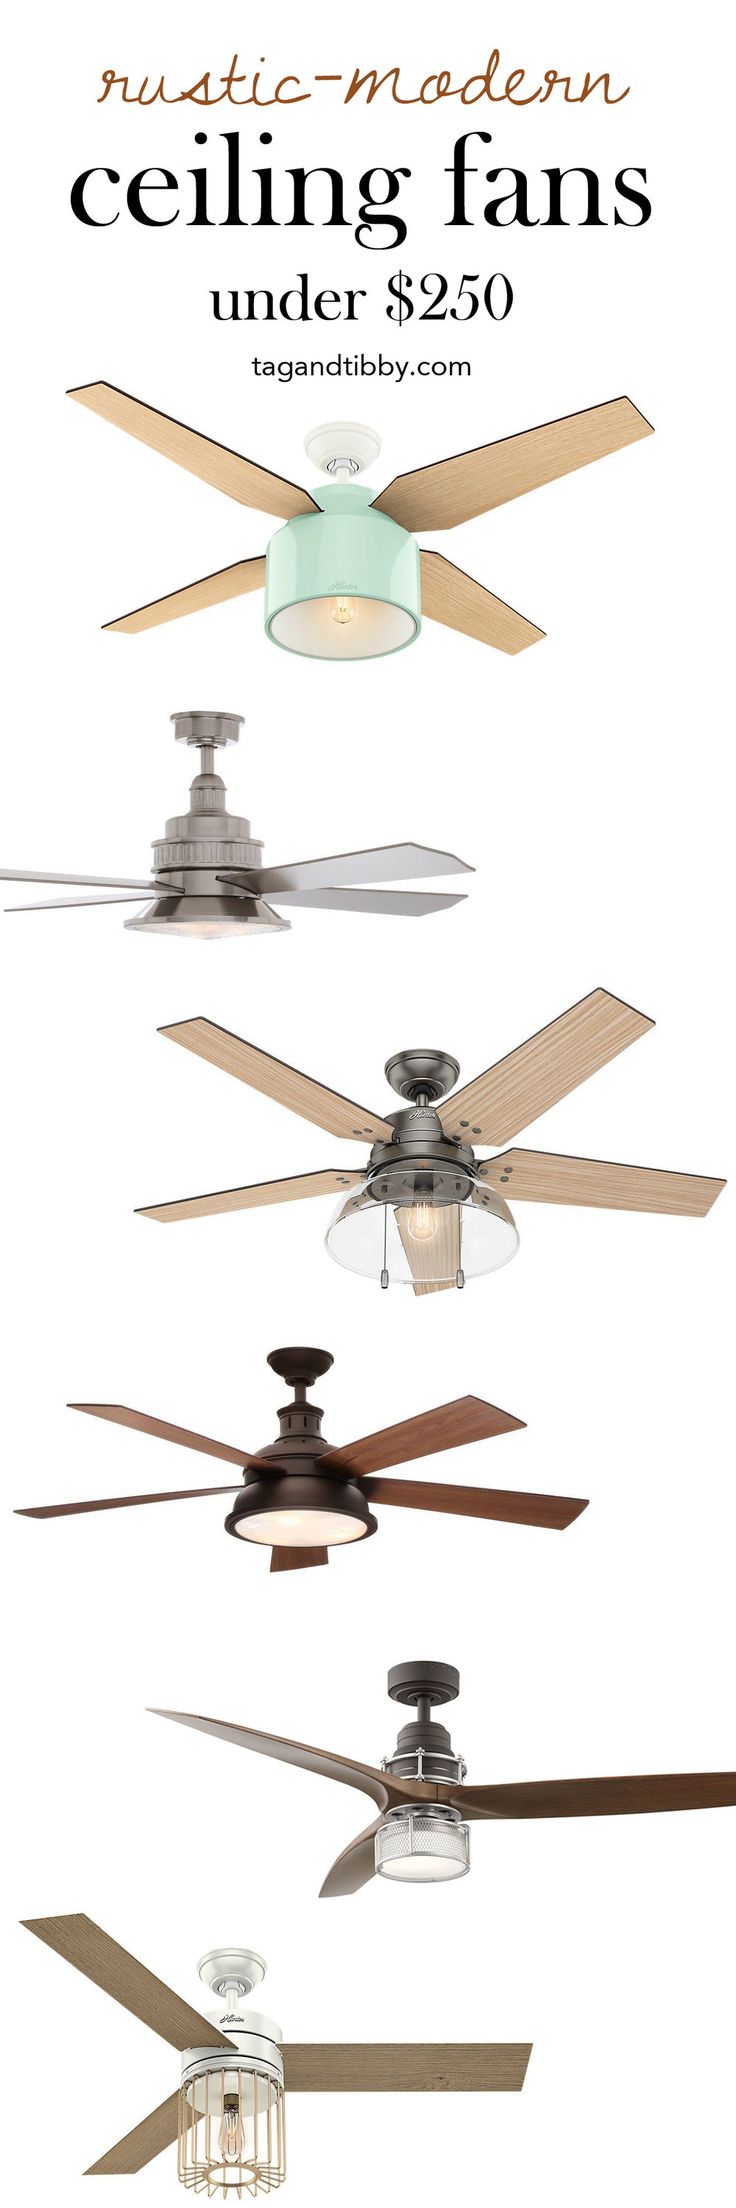 the best rustic-modern ceiling fans for under $250 | tag&tibby